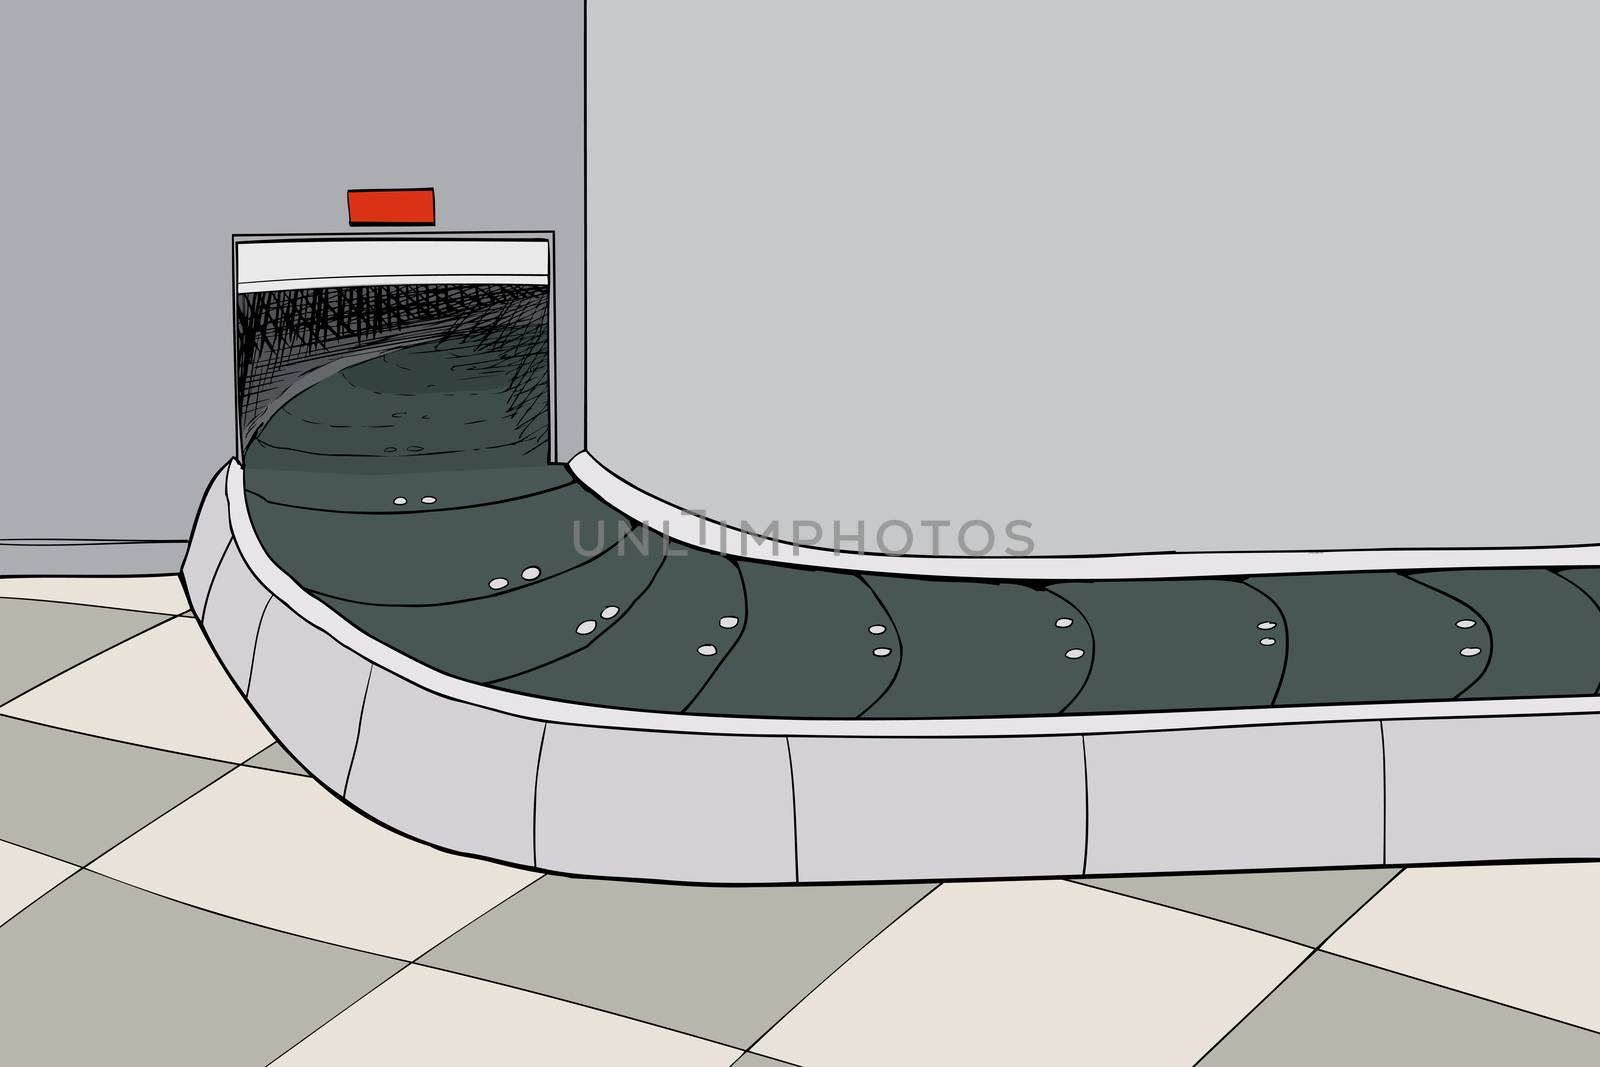 Hand drawn illustration of an empty baggage claim carousel